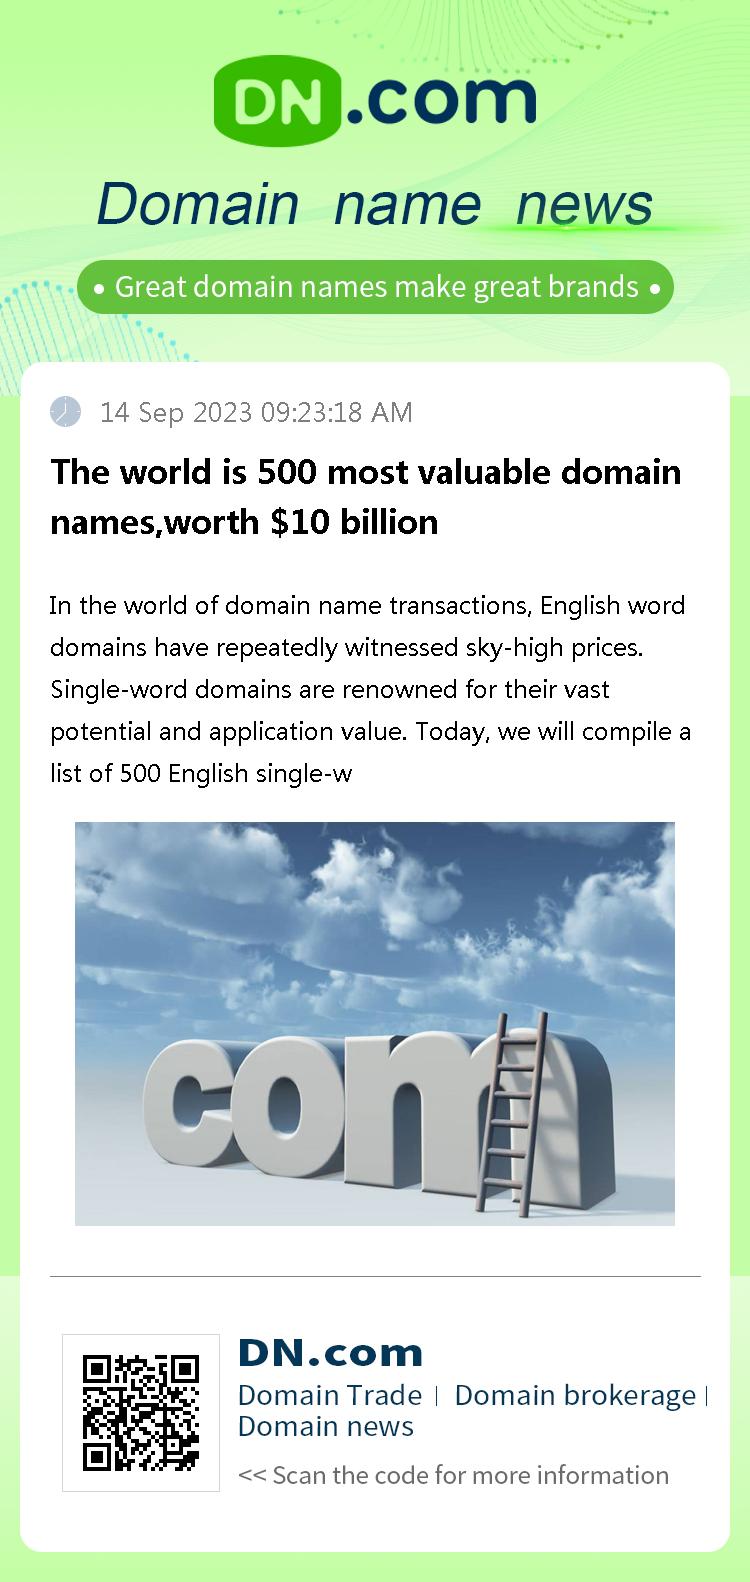 The world is 500 most valuable domain names,worth $10 billion